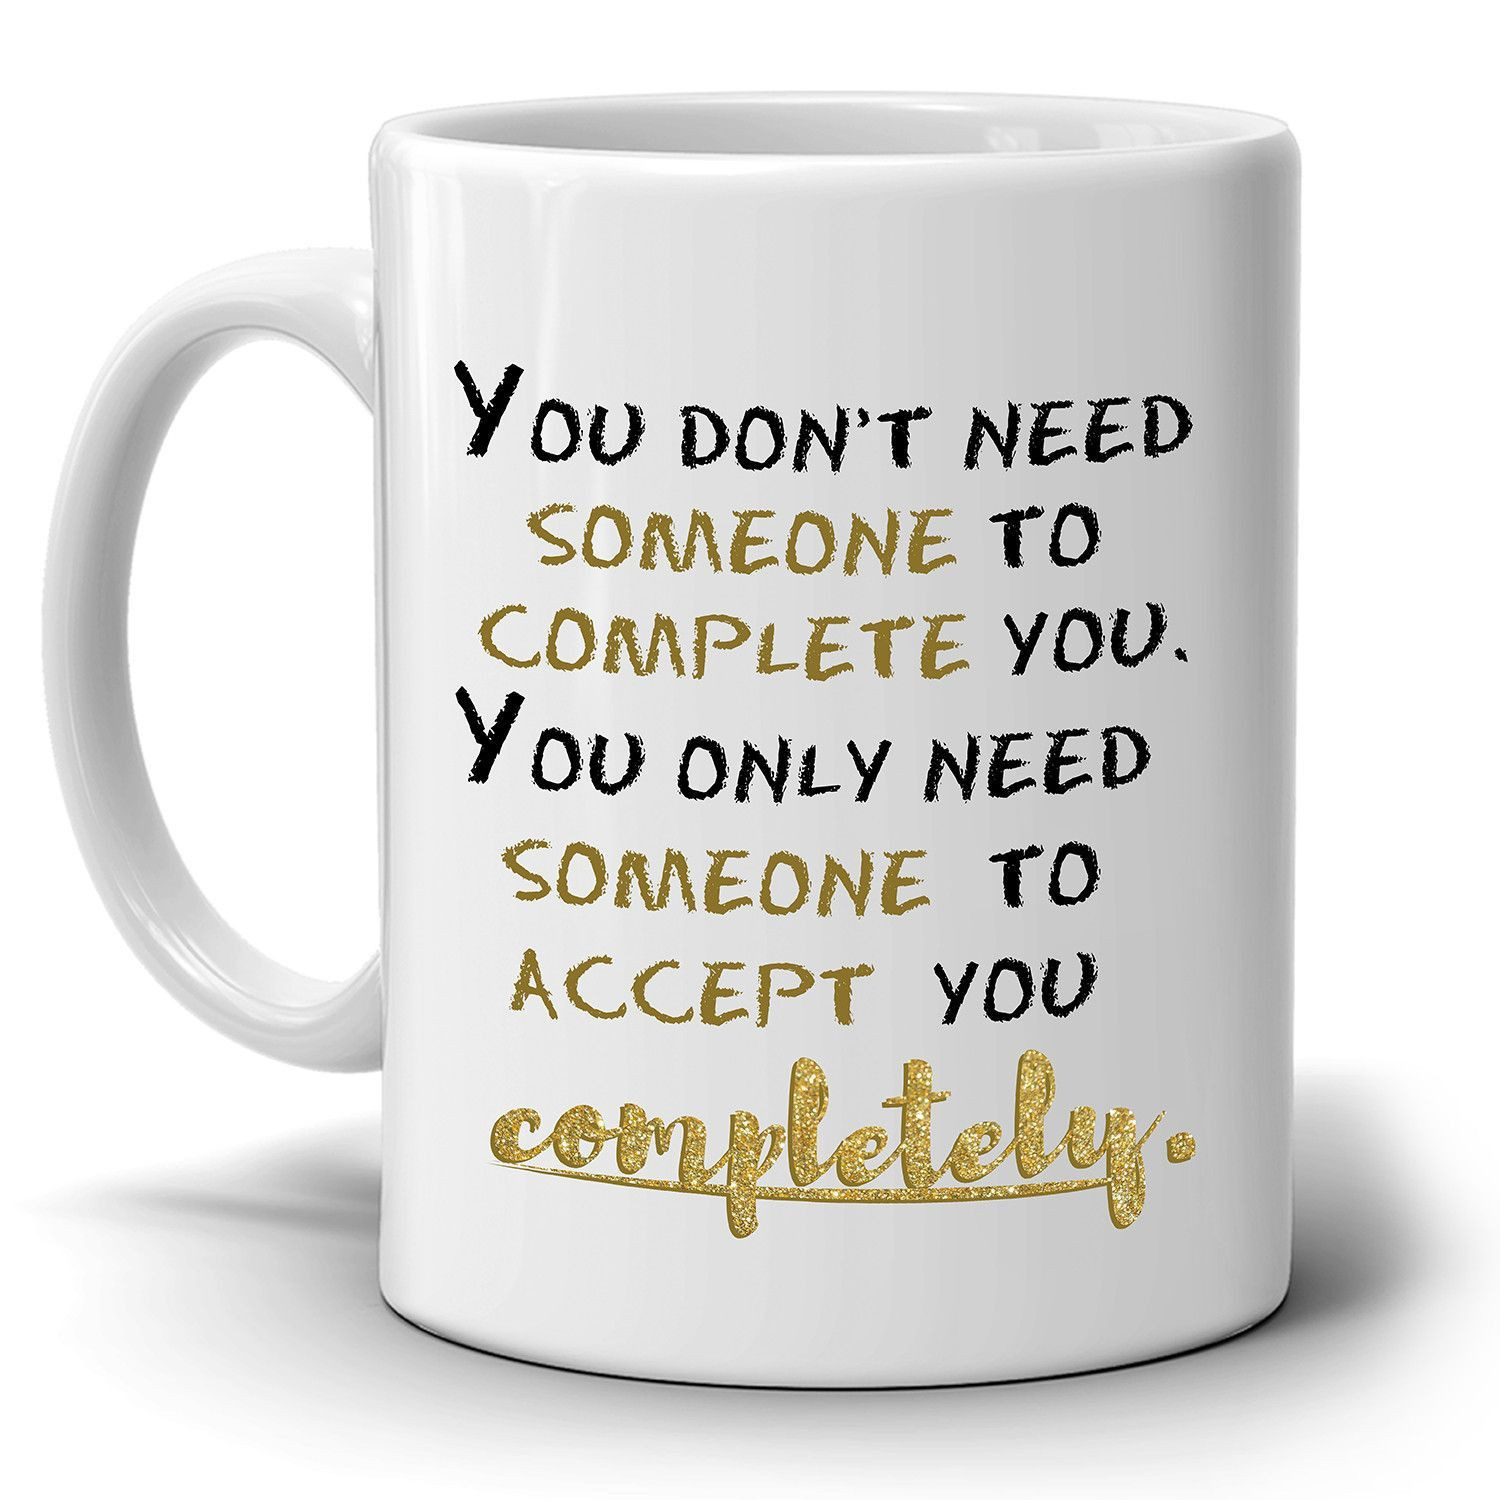 Couples Gift Ideas For Him
 Romantic Gifts for Him and Her Coffee Mug Perfect for